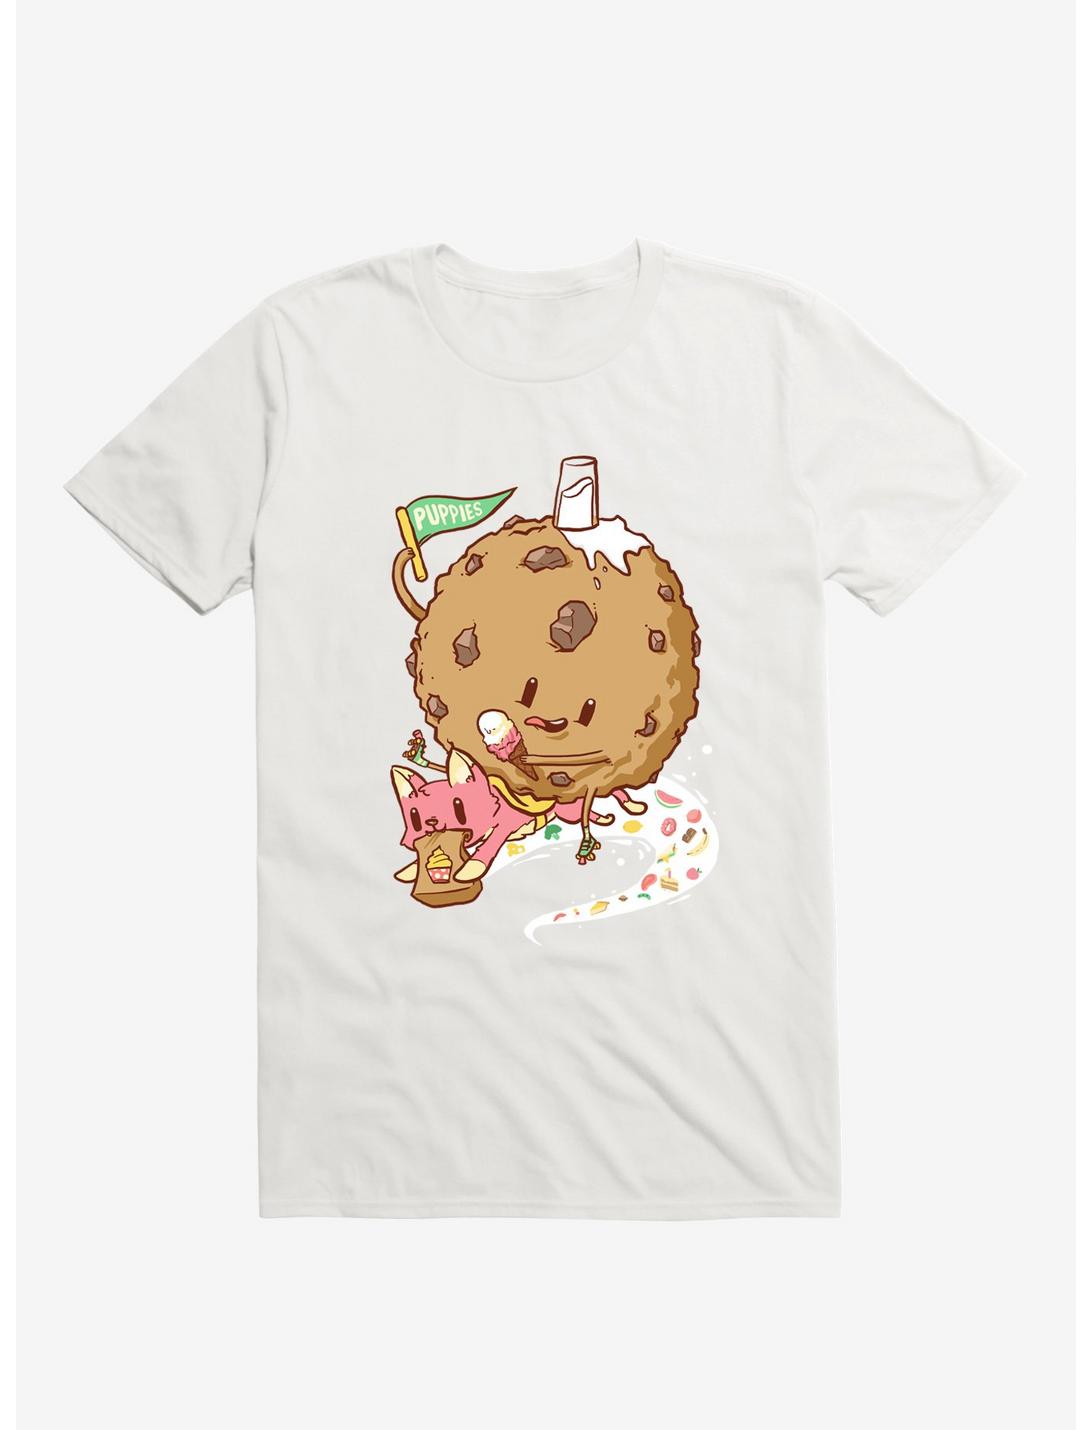 Cake Delivery Cat White T-Shirt, WHITE, hi-res